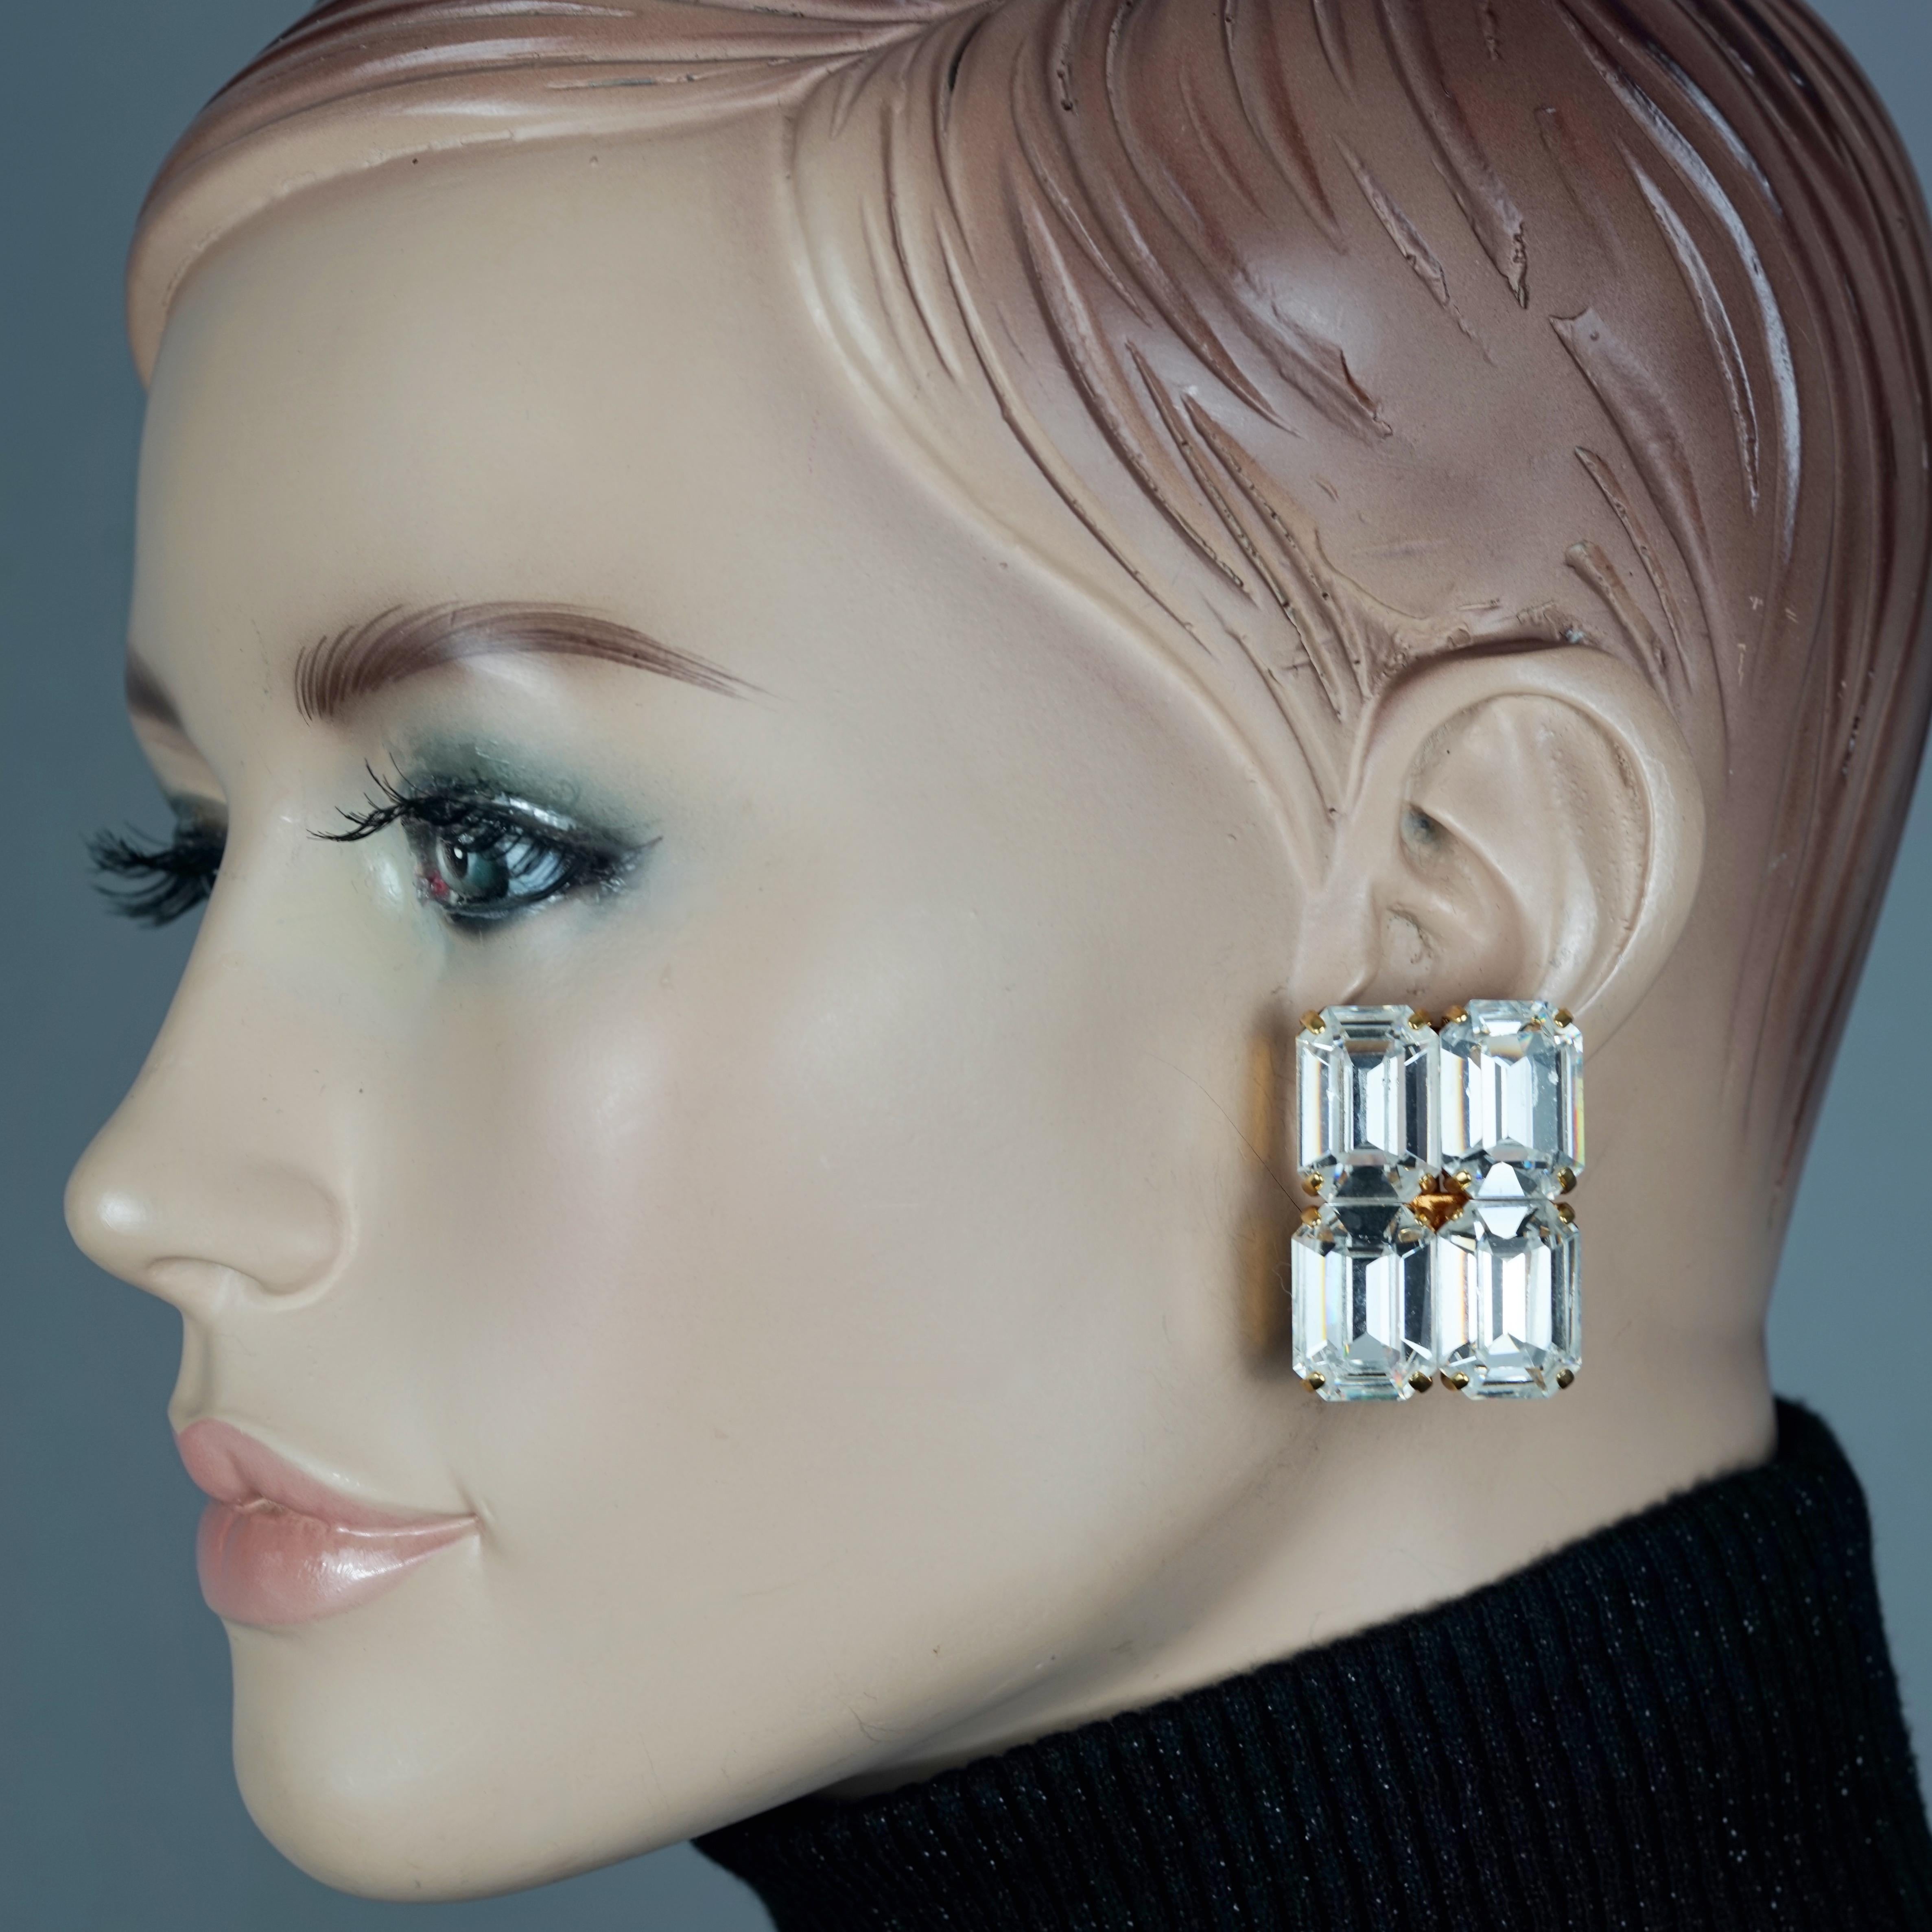 Vintage LOUIS FERAUD Crystal Rectangular Earrings

Measurements:
Height: 1.42 inches (3.6 cm)
Width: 1.02 inches (2.6 cm)
Weight per Earring: 19 grams

Features:
- 100% Authentic LOUIS FERAUD.
- 4 Rectangular crystal earrings.
- Gold tone